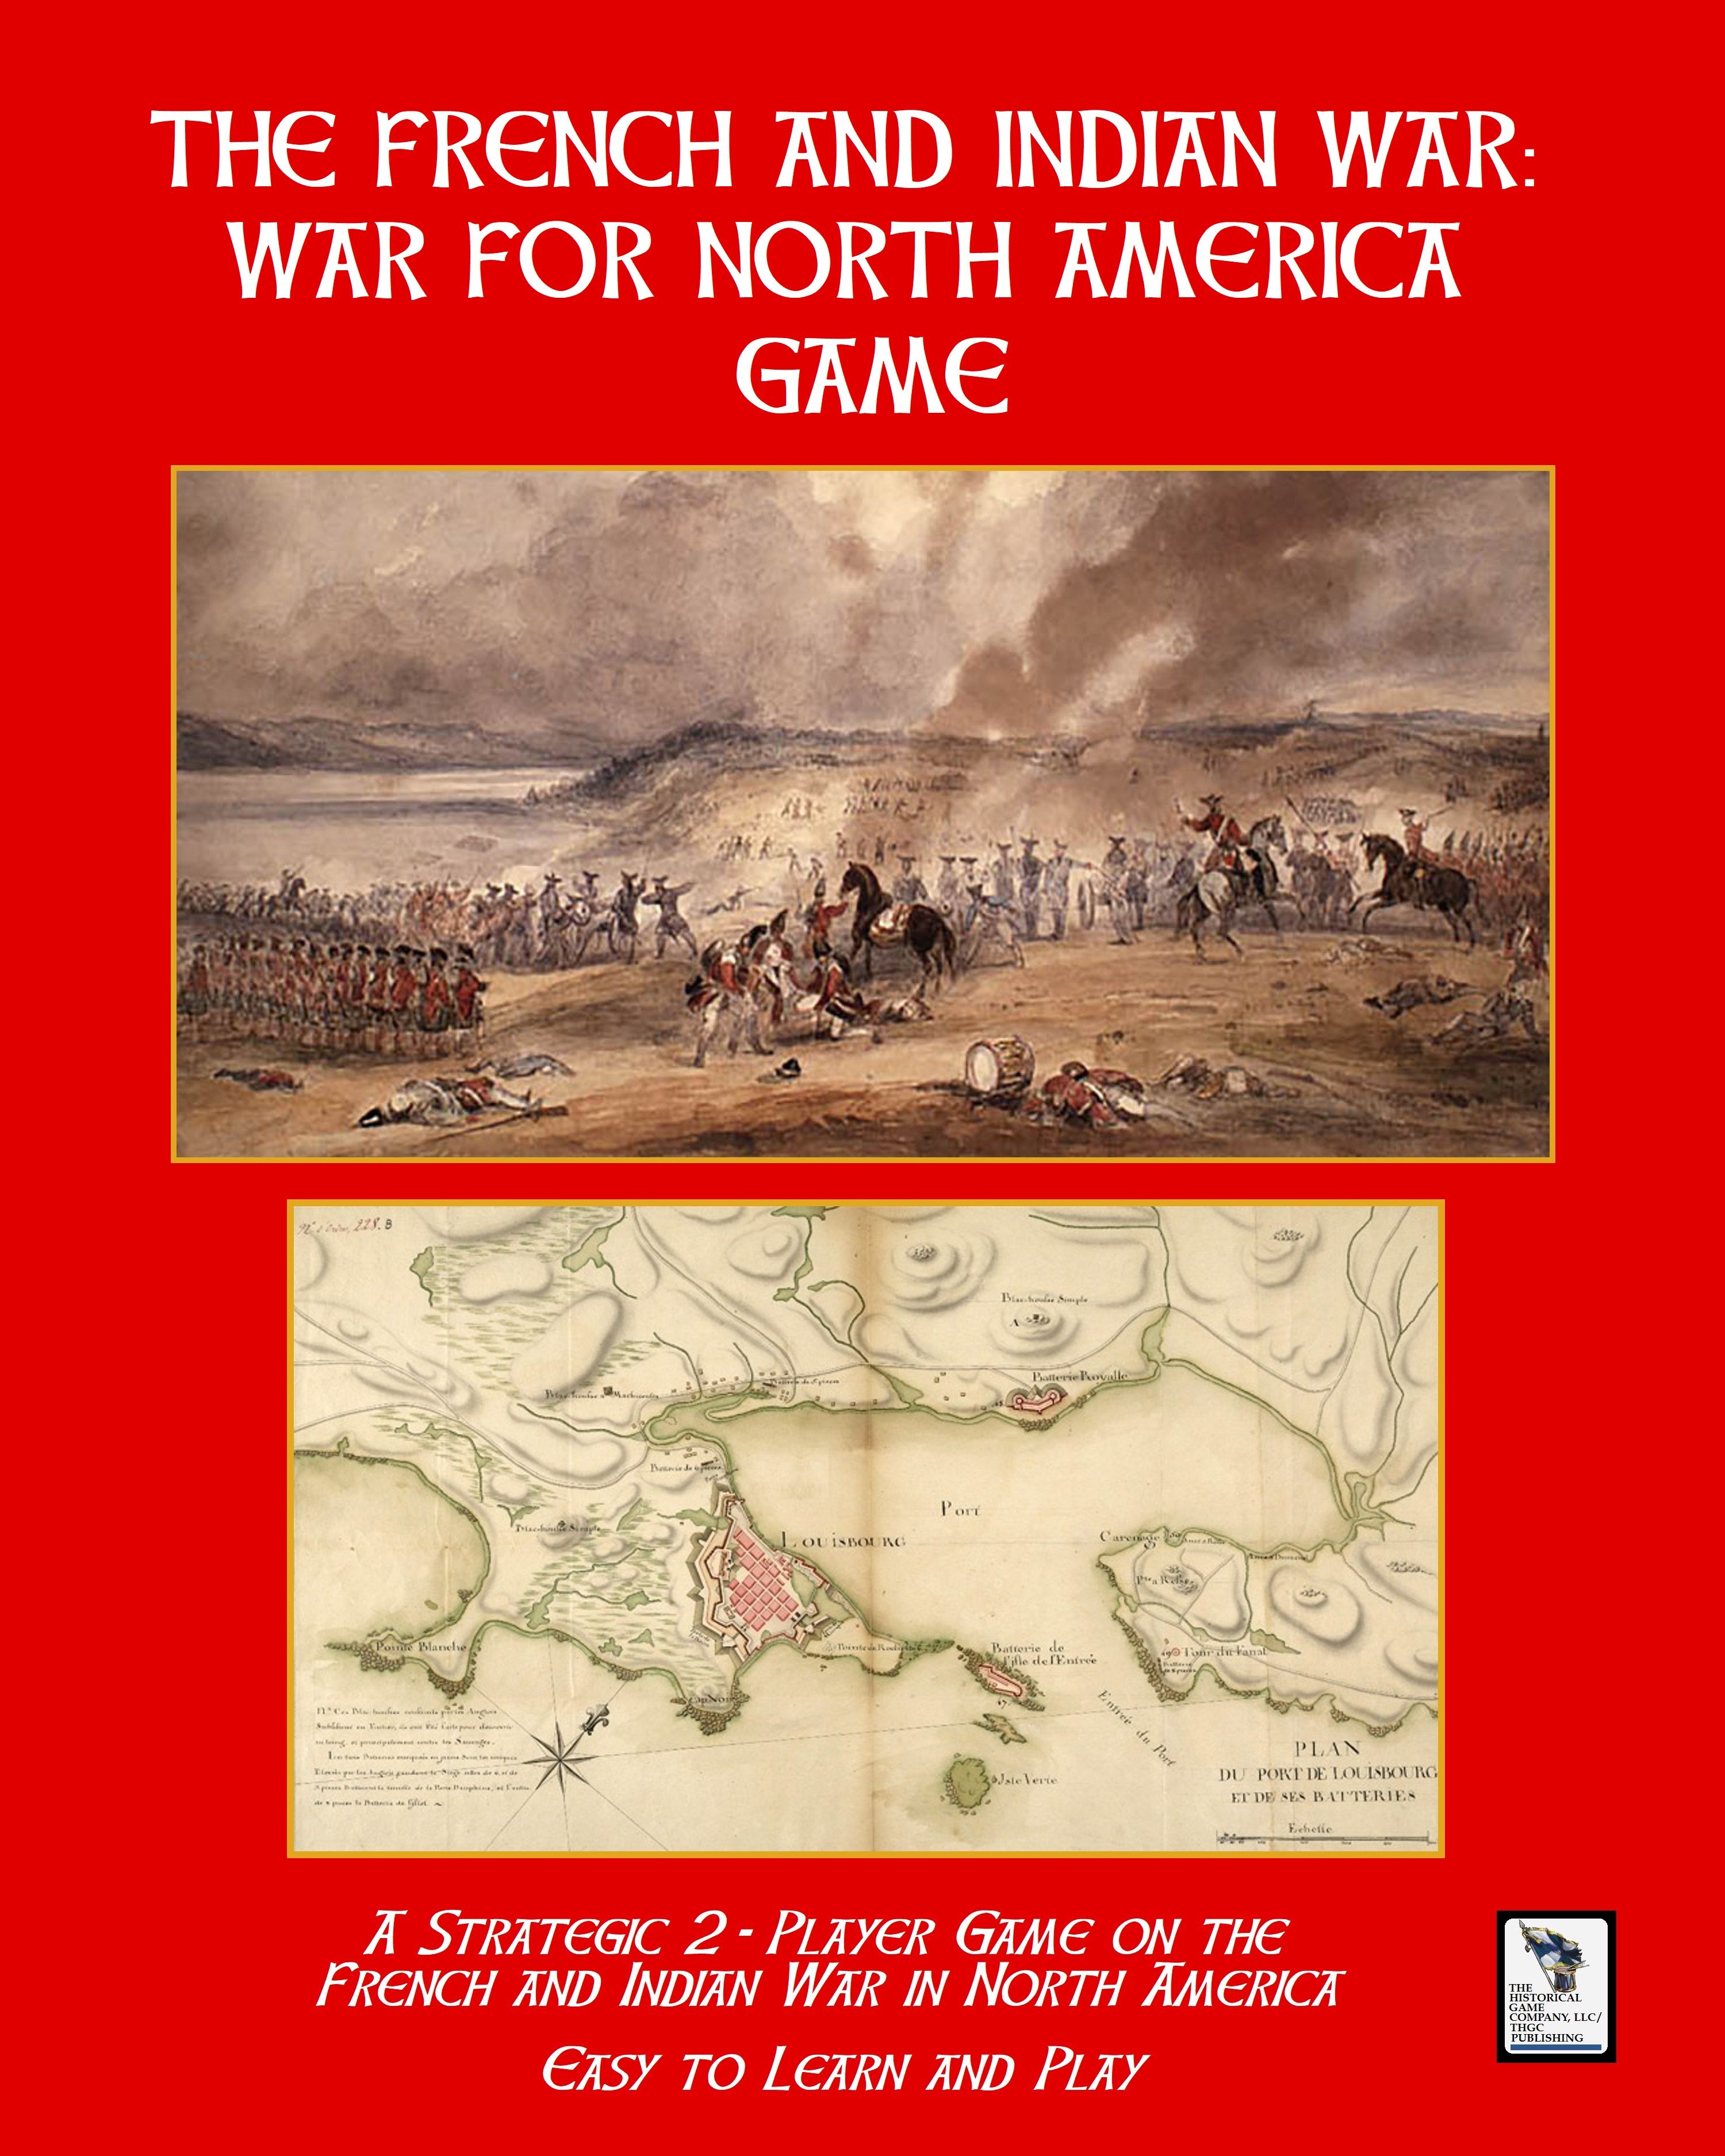 The French and Indian War: War for North America Game